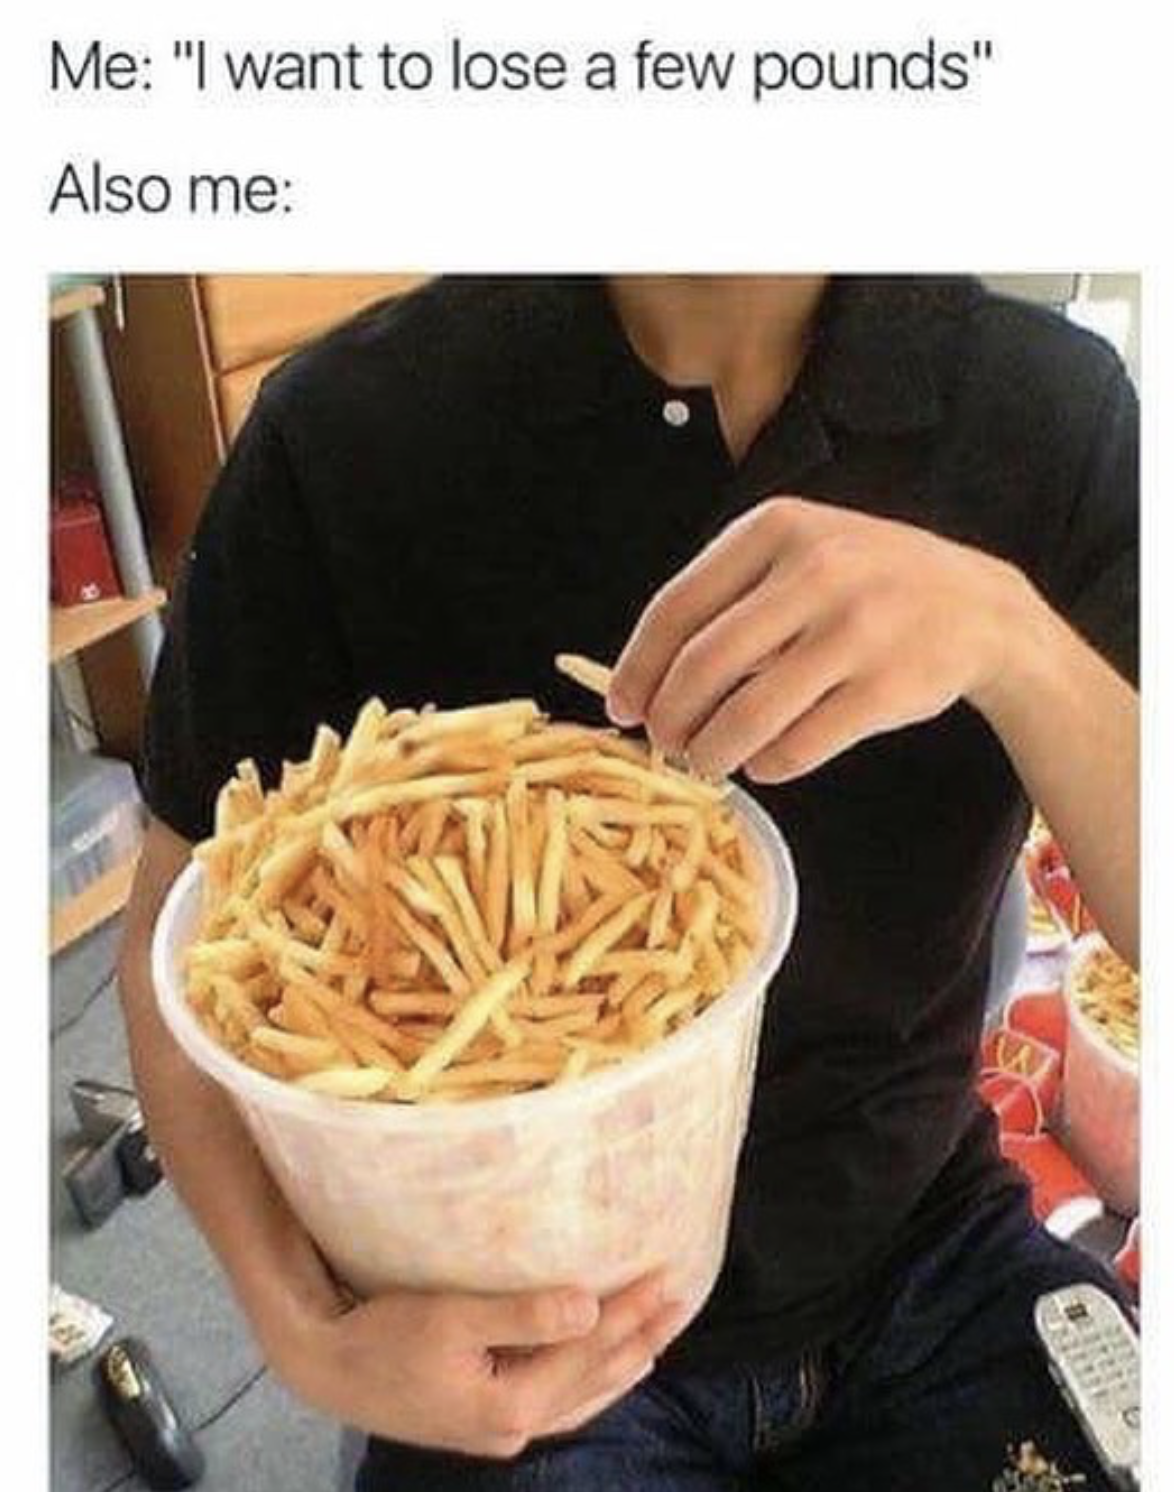 Funny meme about wanting to lose weight but also eating a huge tub of fries